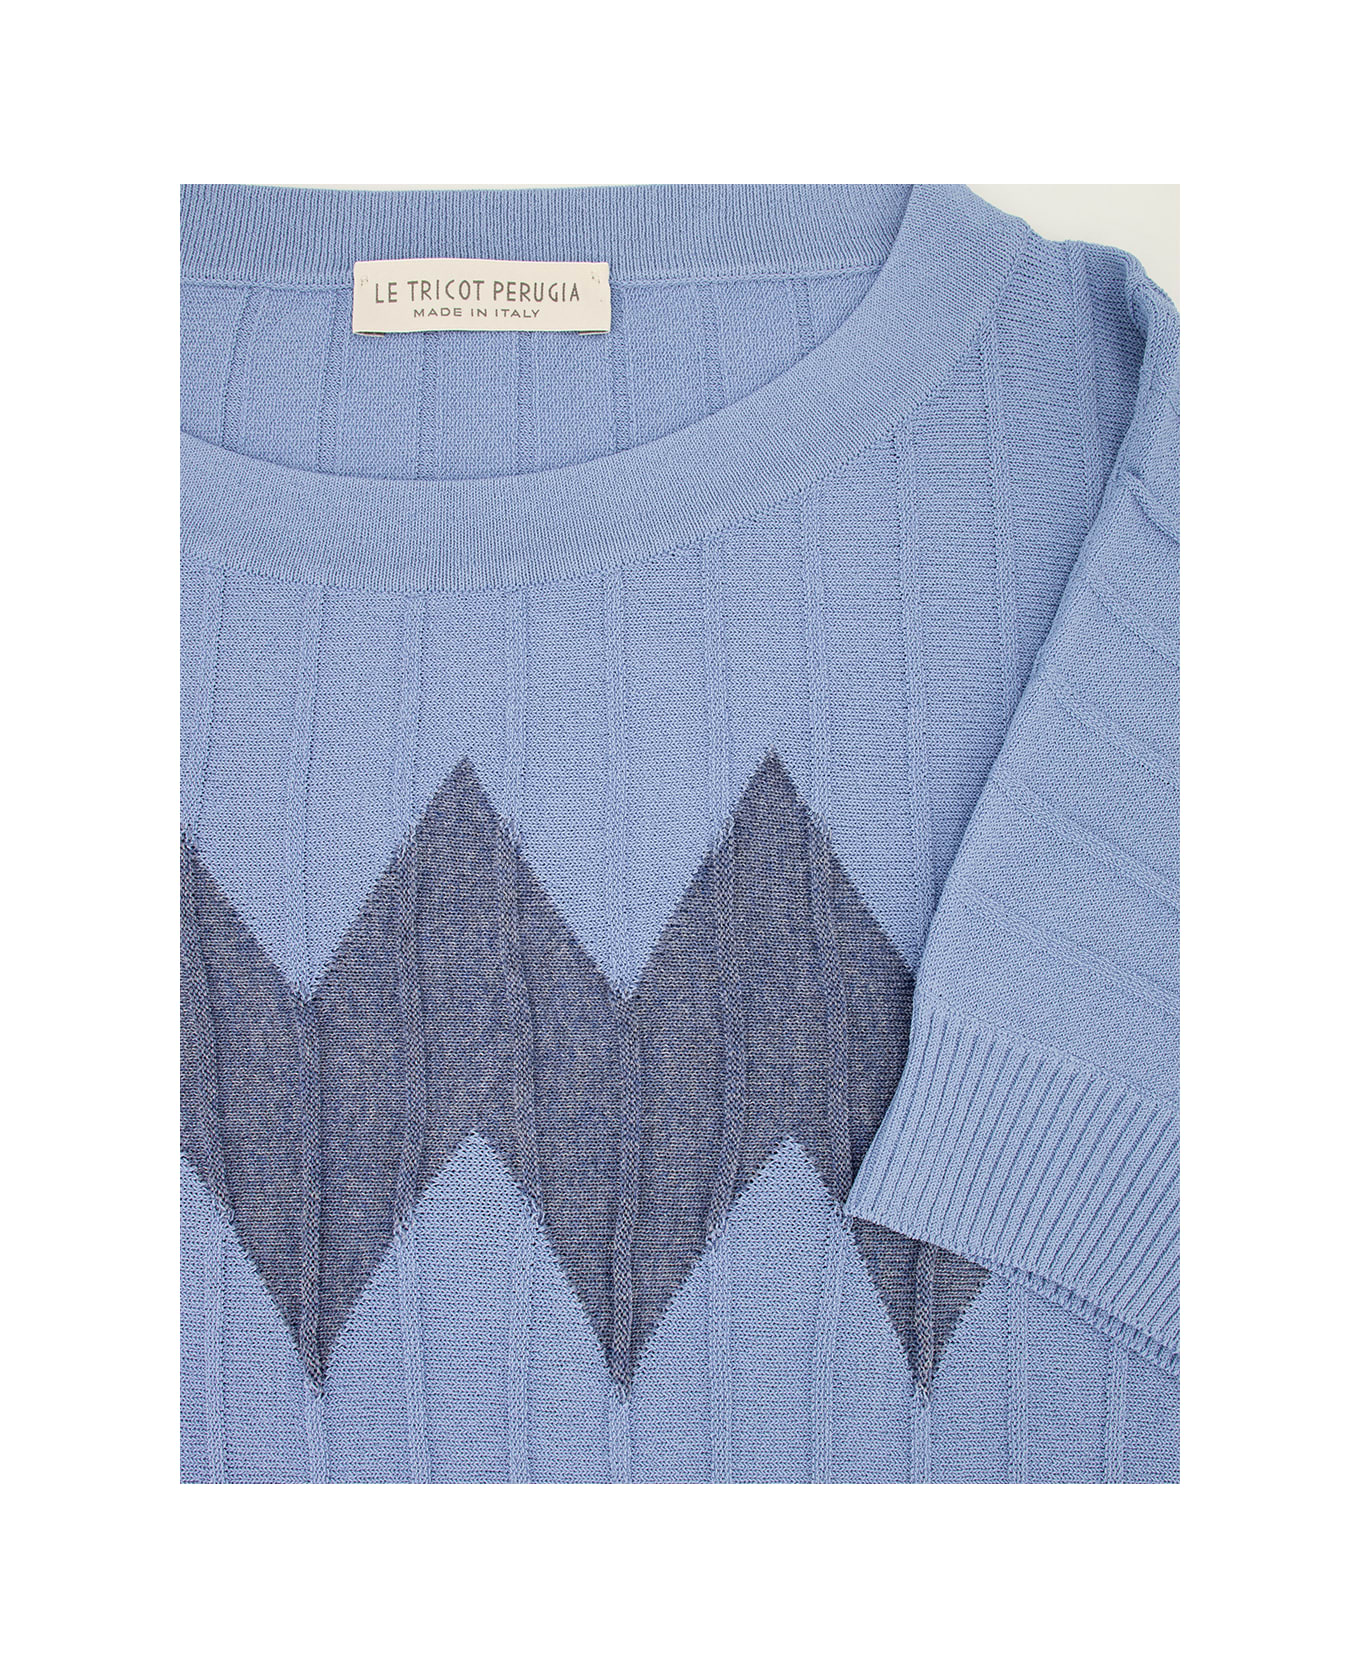 Le Tricot Perugia Sweater - BLUE JEANS ニットウェア